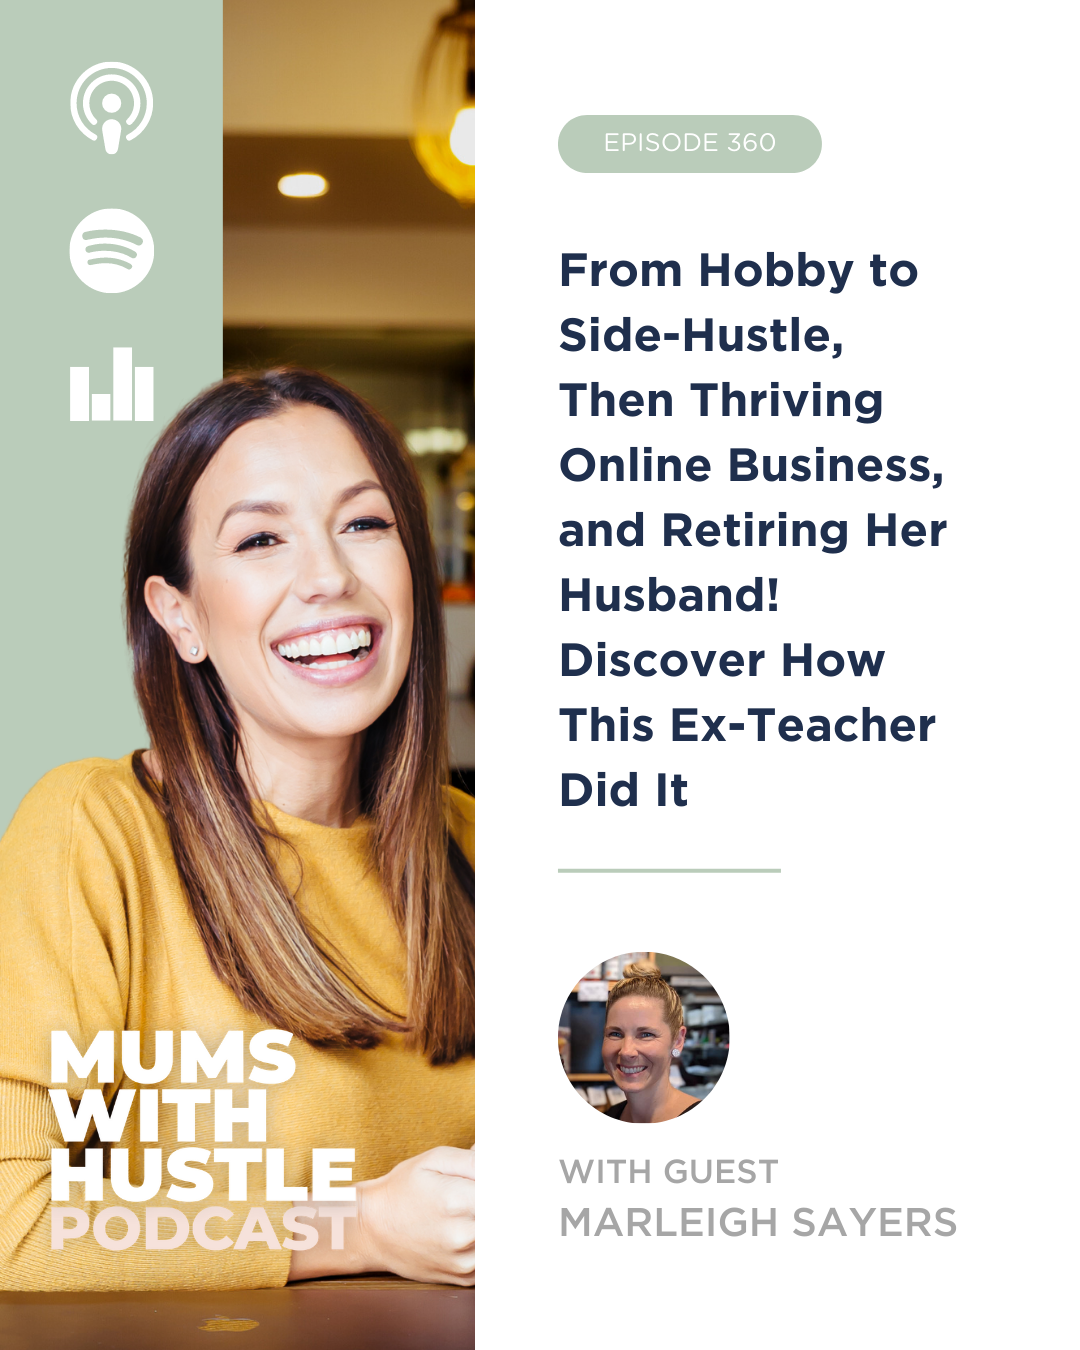 MWH 360 : From Hobby to Side-Hustle, Then Thriving Online Business, and Retiring Her Husband! Discover How This Ex-Teacher Did It with Marleigh Sayers